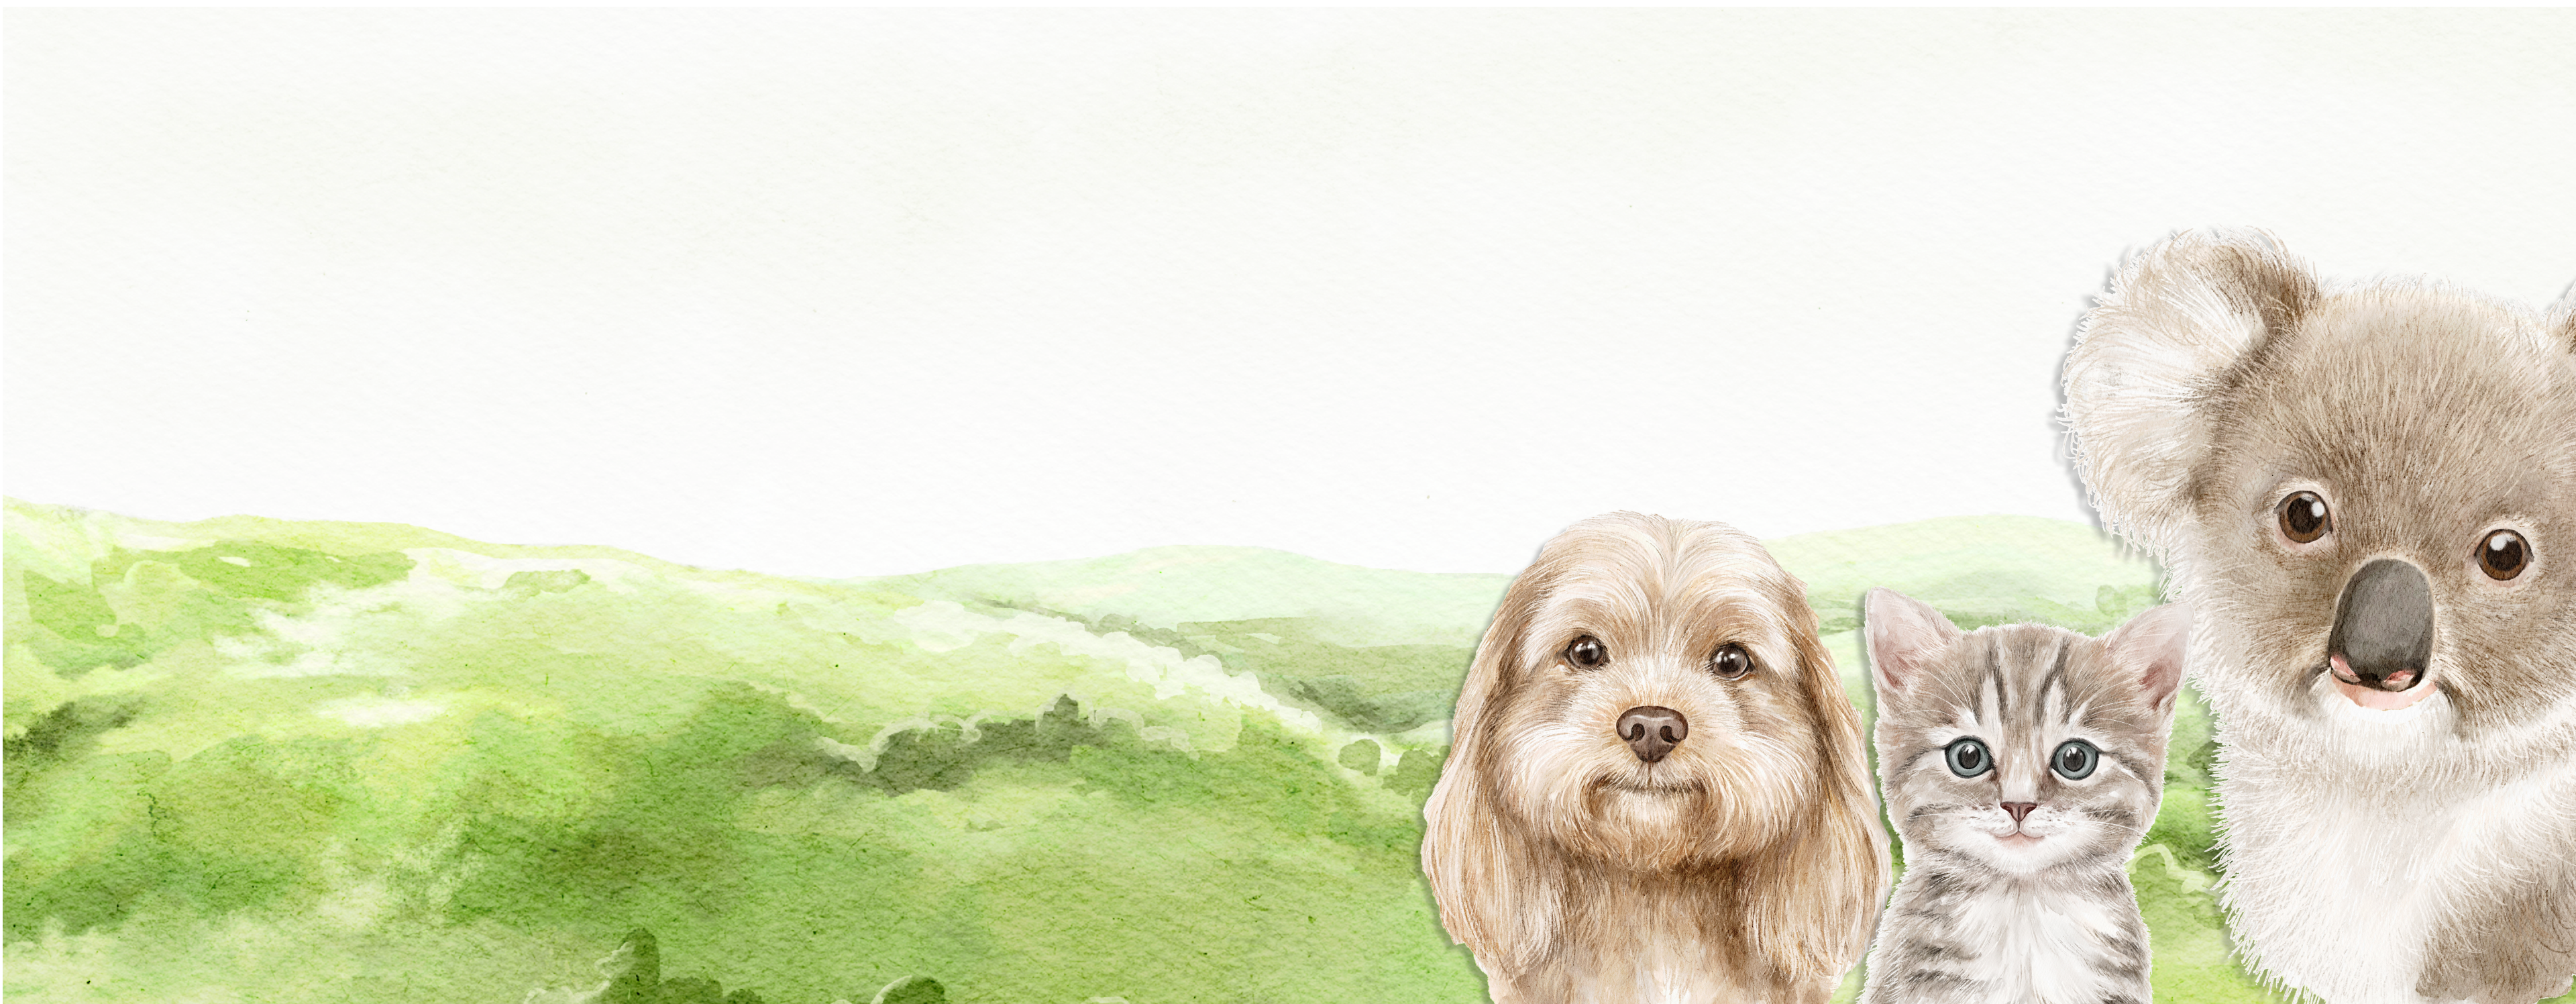 Illustrated rolling green hills with dog, cat, and koala